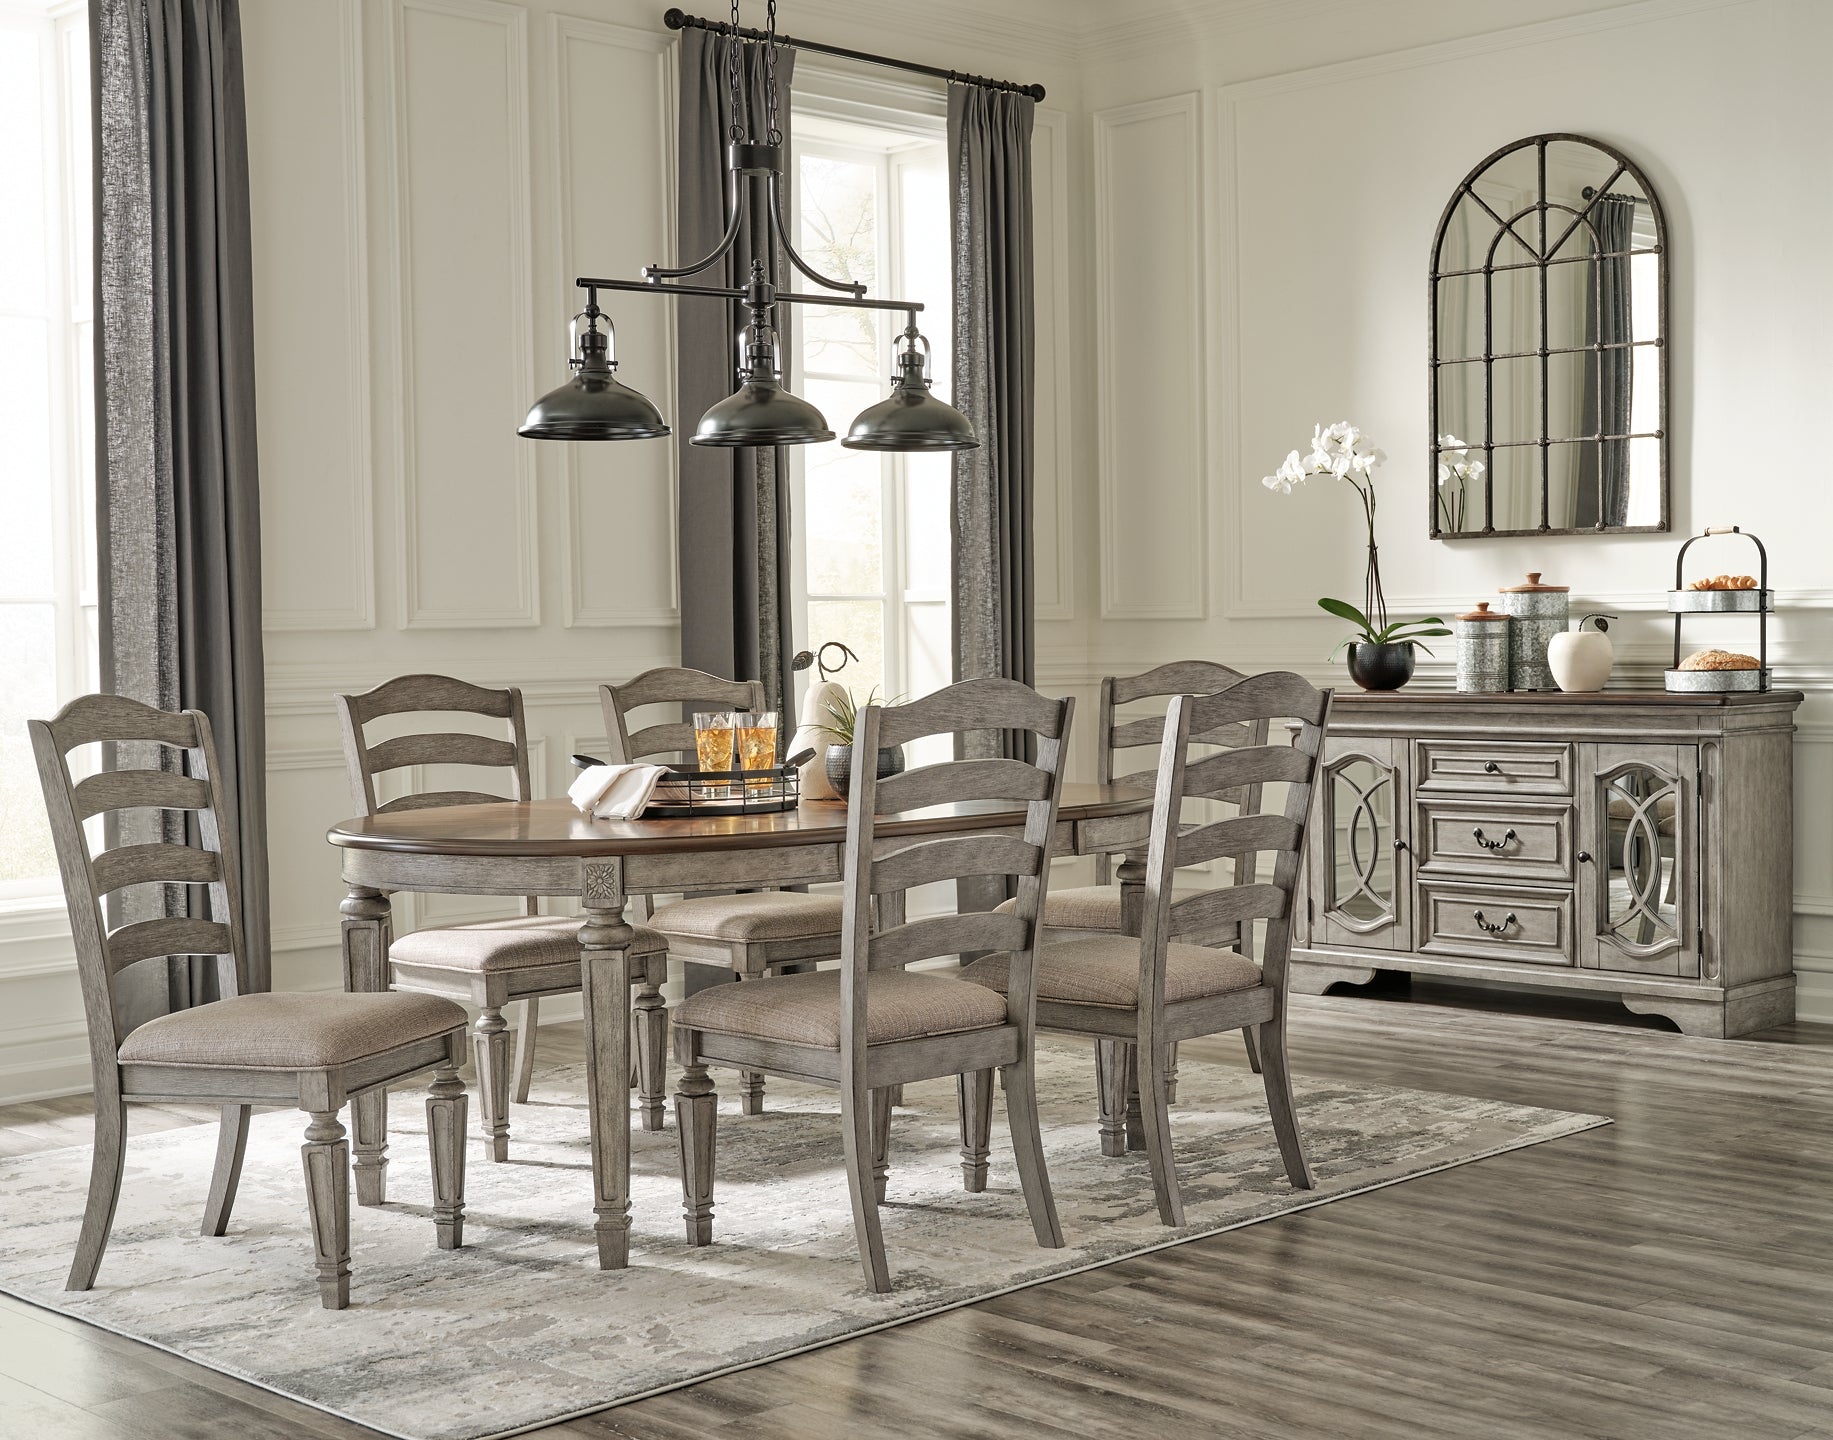 Lodenbay Dining Table and 6 Chairs with Storage JB's Furniture  Home Furniture, Home Decor, Furniture Store